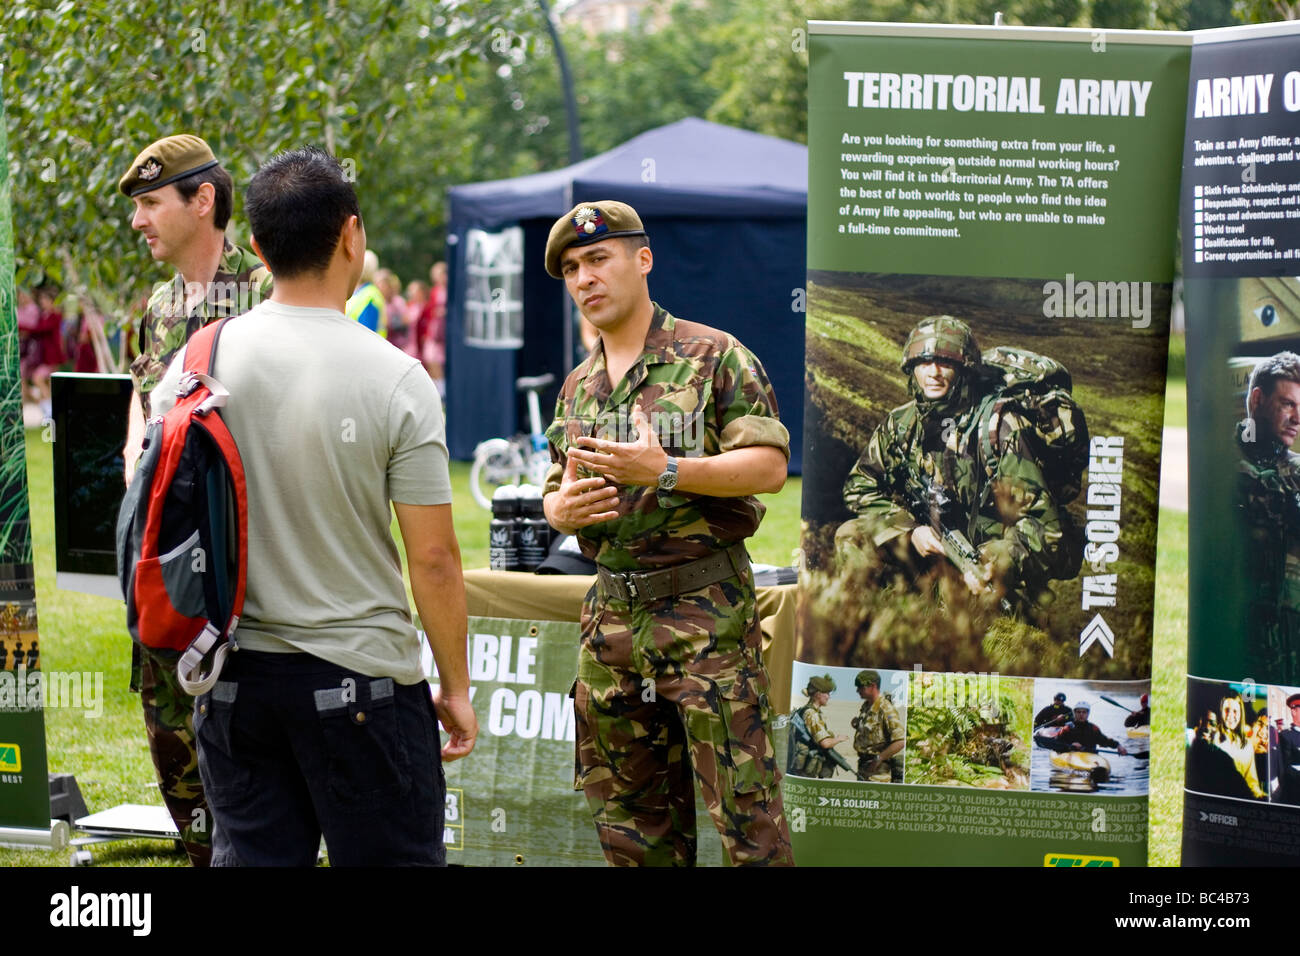 Territorial Army recruitment on Armed Forces Day in London. Stock Photo